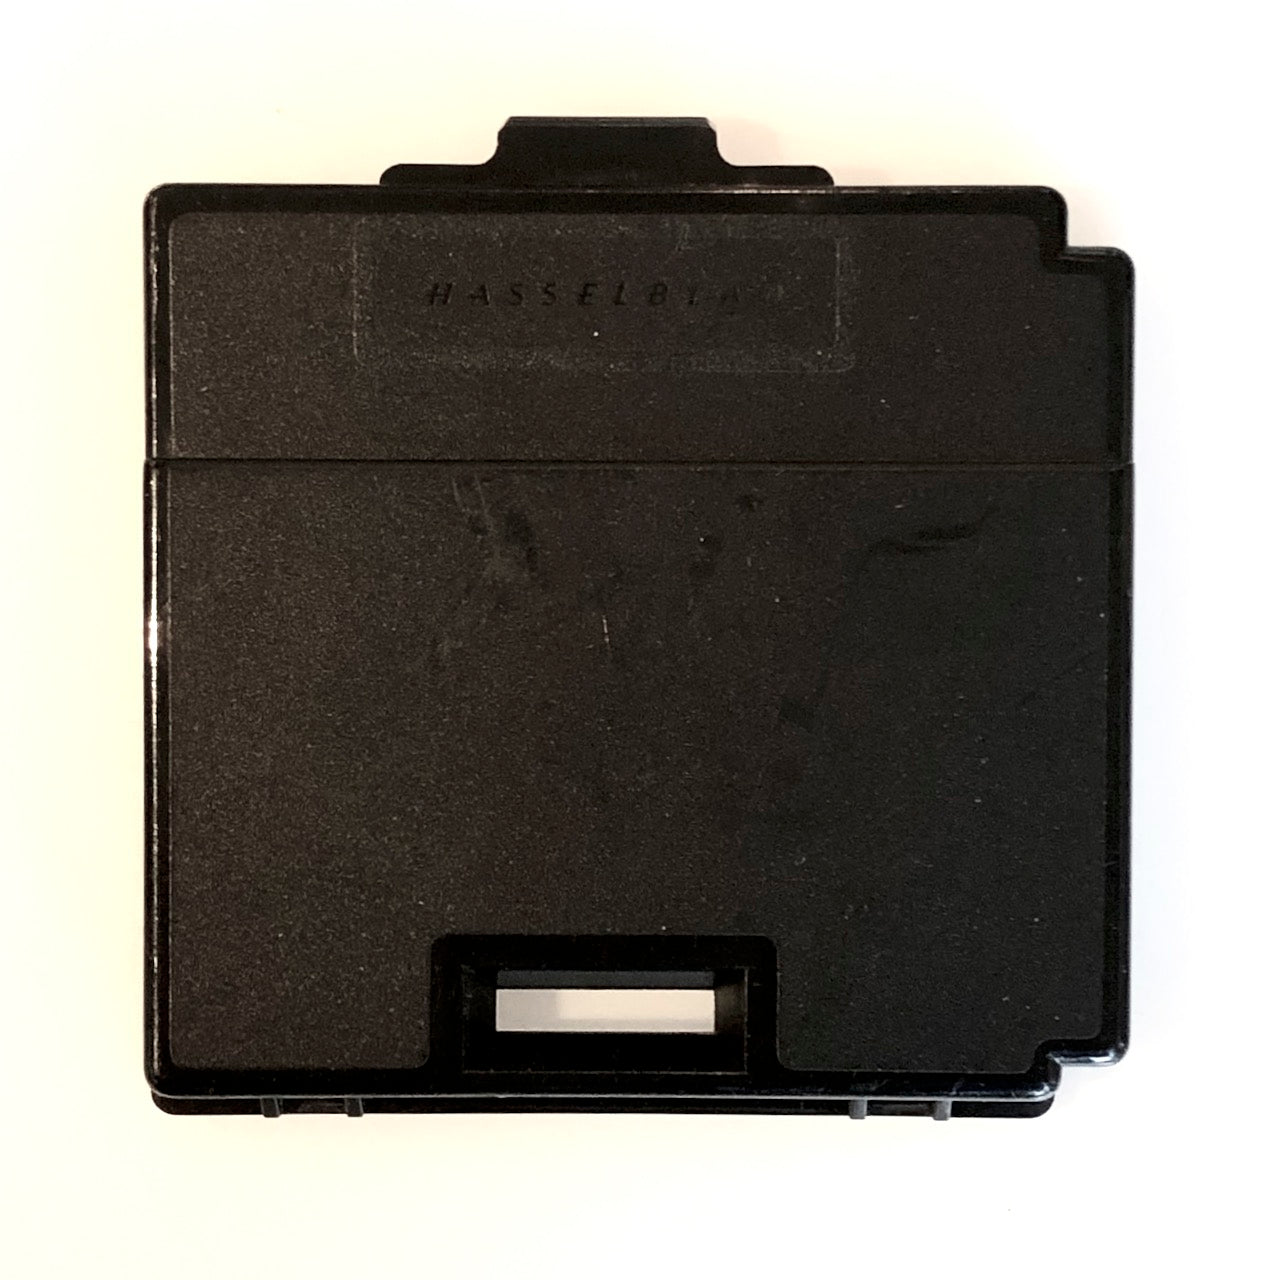 Hasselblad V series rear body cover 51063